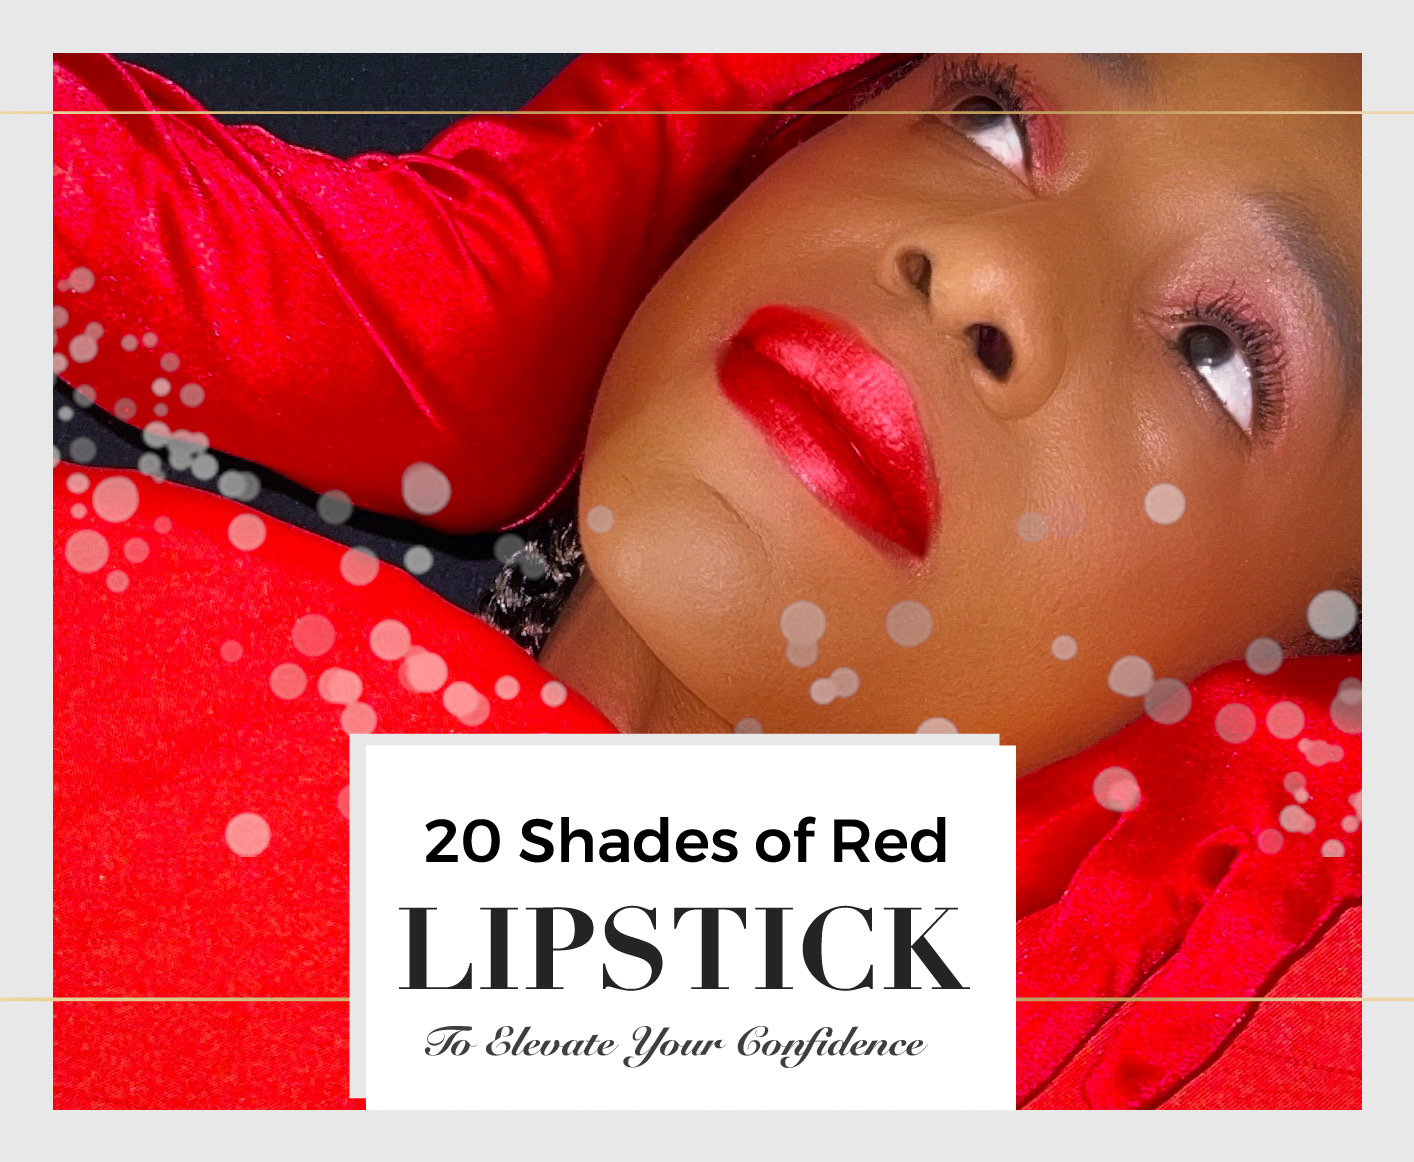 20 shades of red lipstick to elevate your confidence